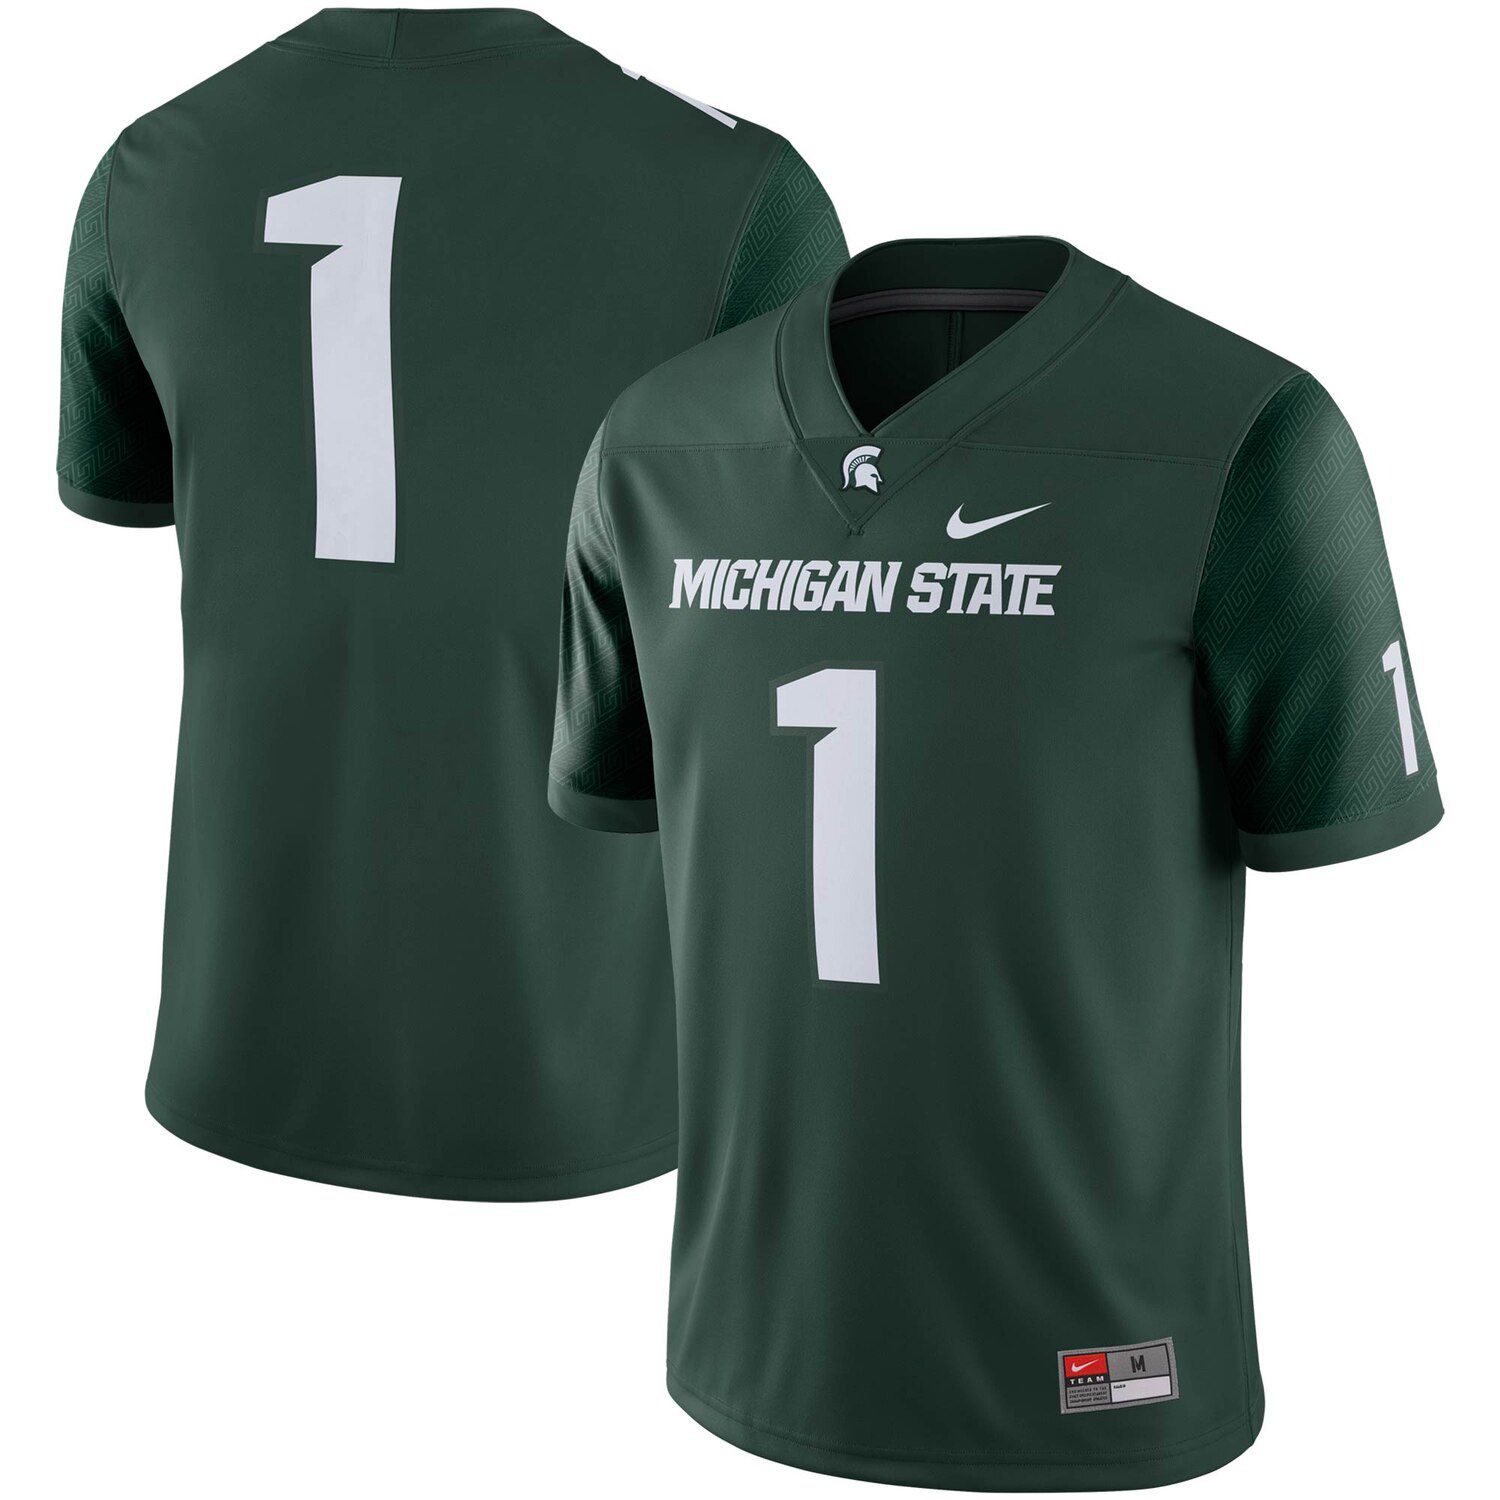 Michigan State Spartans Game Jersey